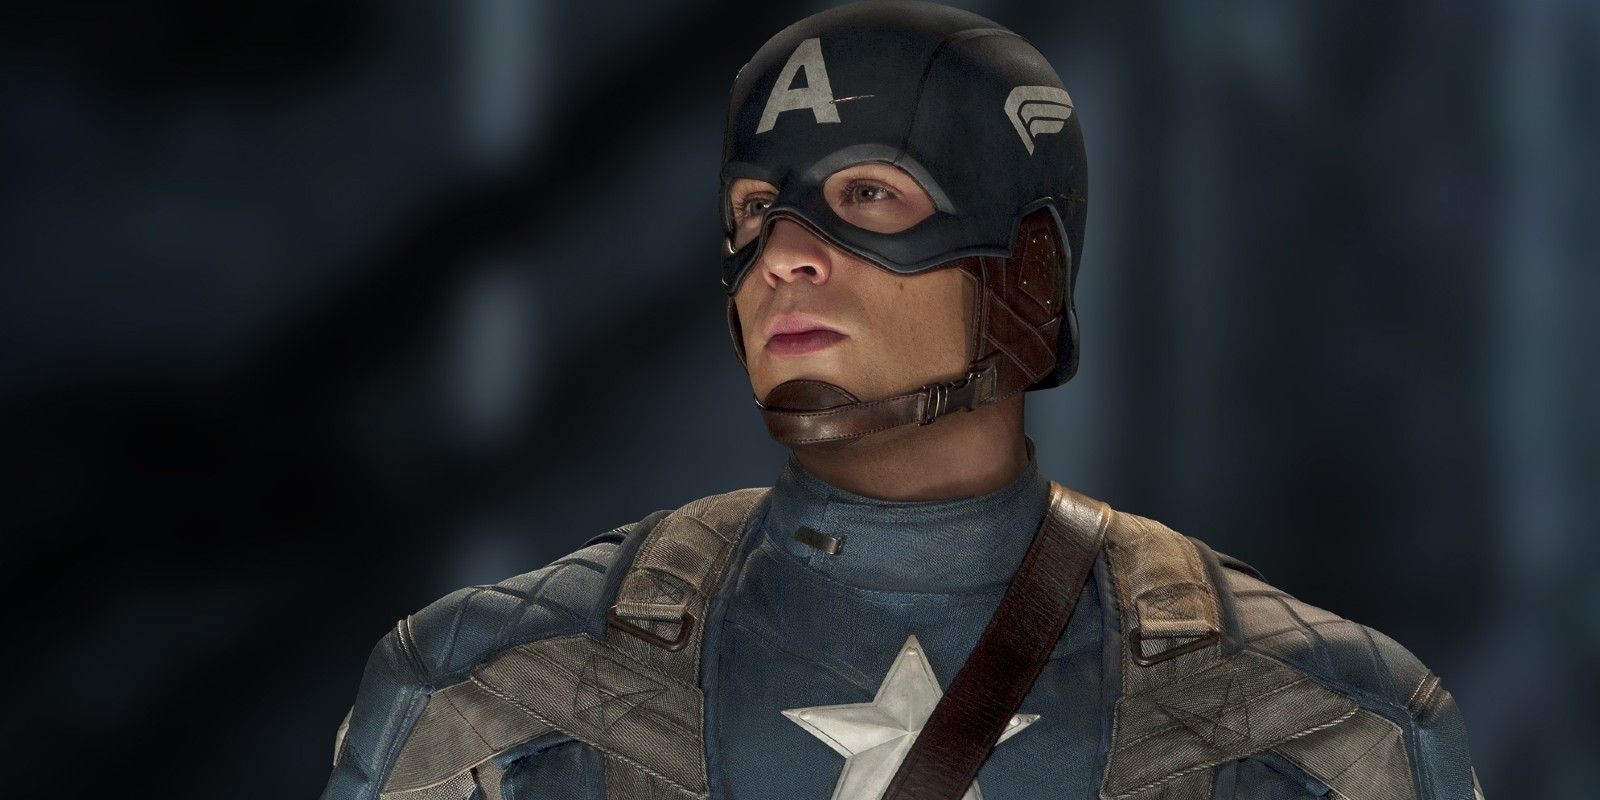 Steve Rogers in his suit in Captain America the First Avenger